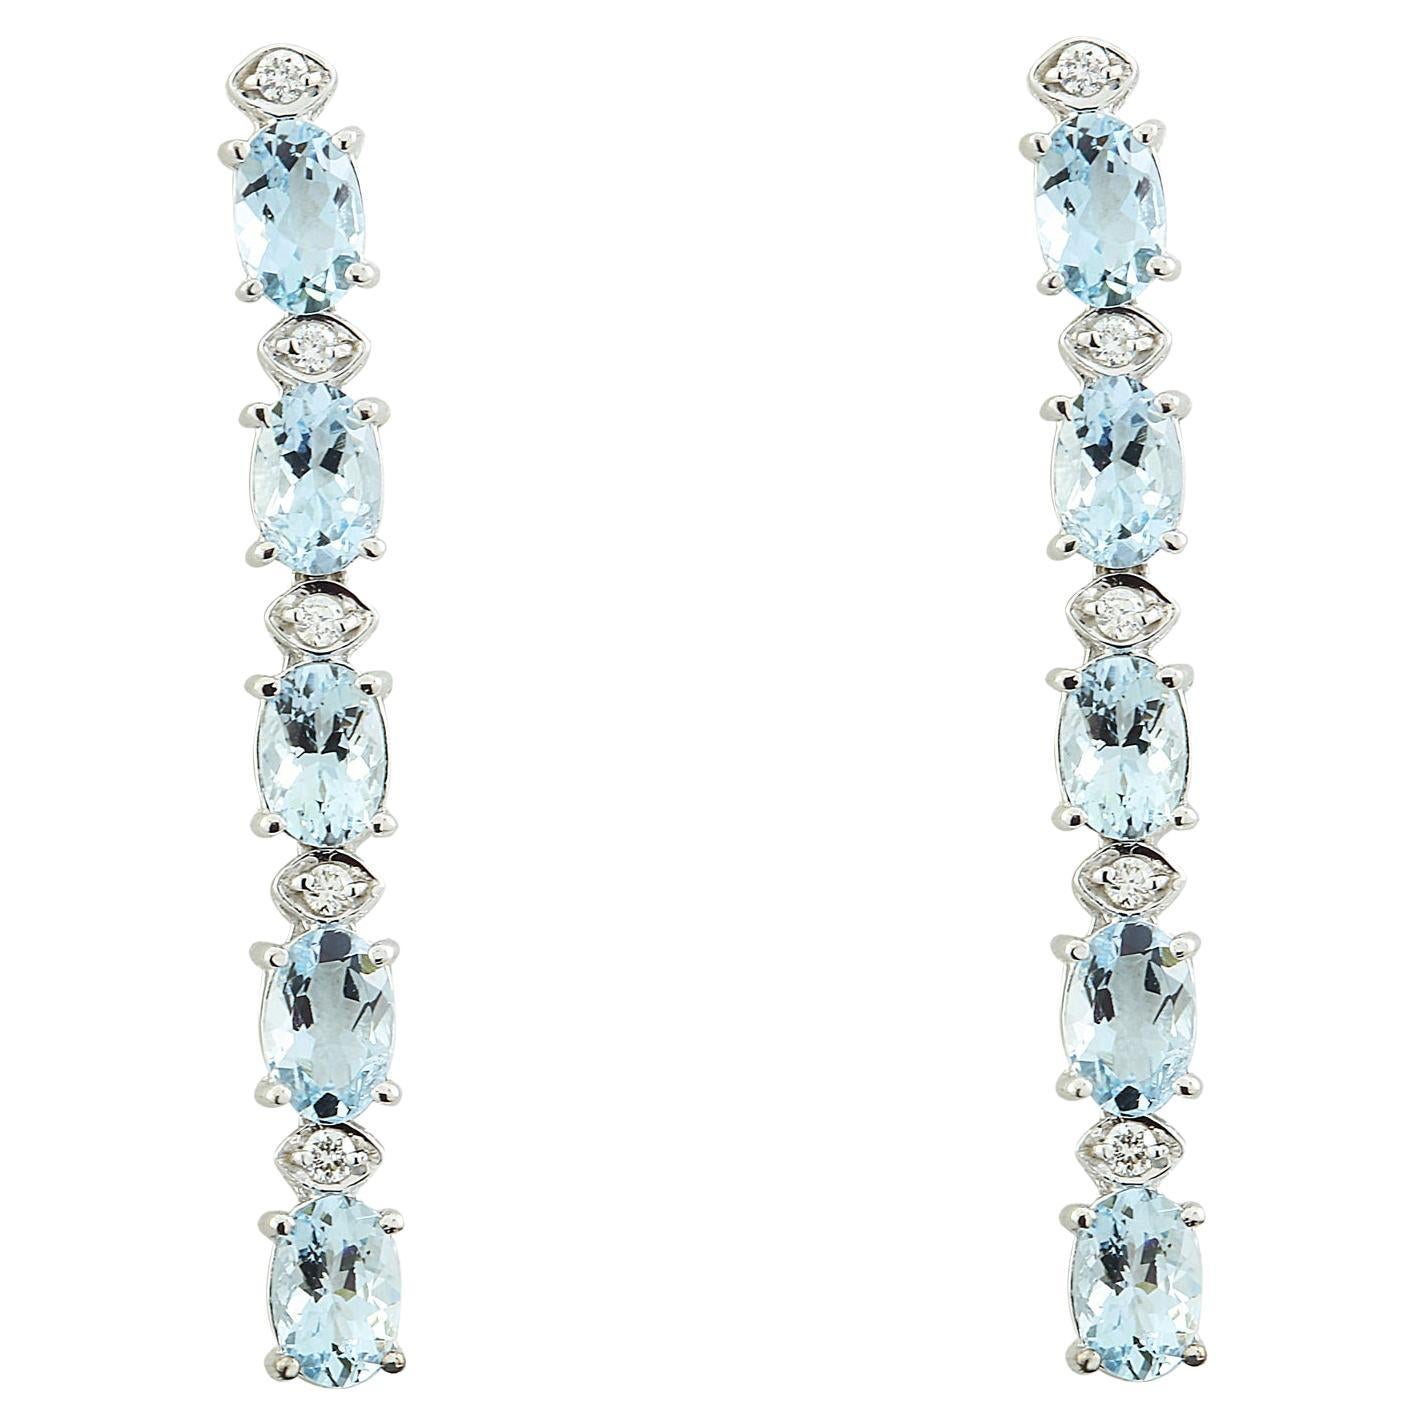 Dazzling Natural Aquamarine Diamond Earrings in 14K Solid White Gold